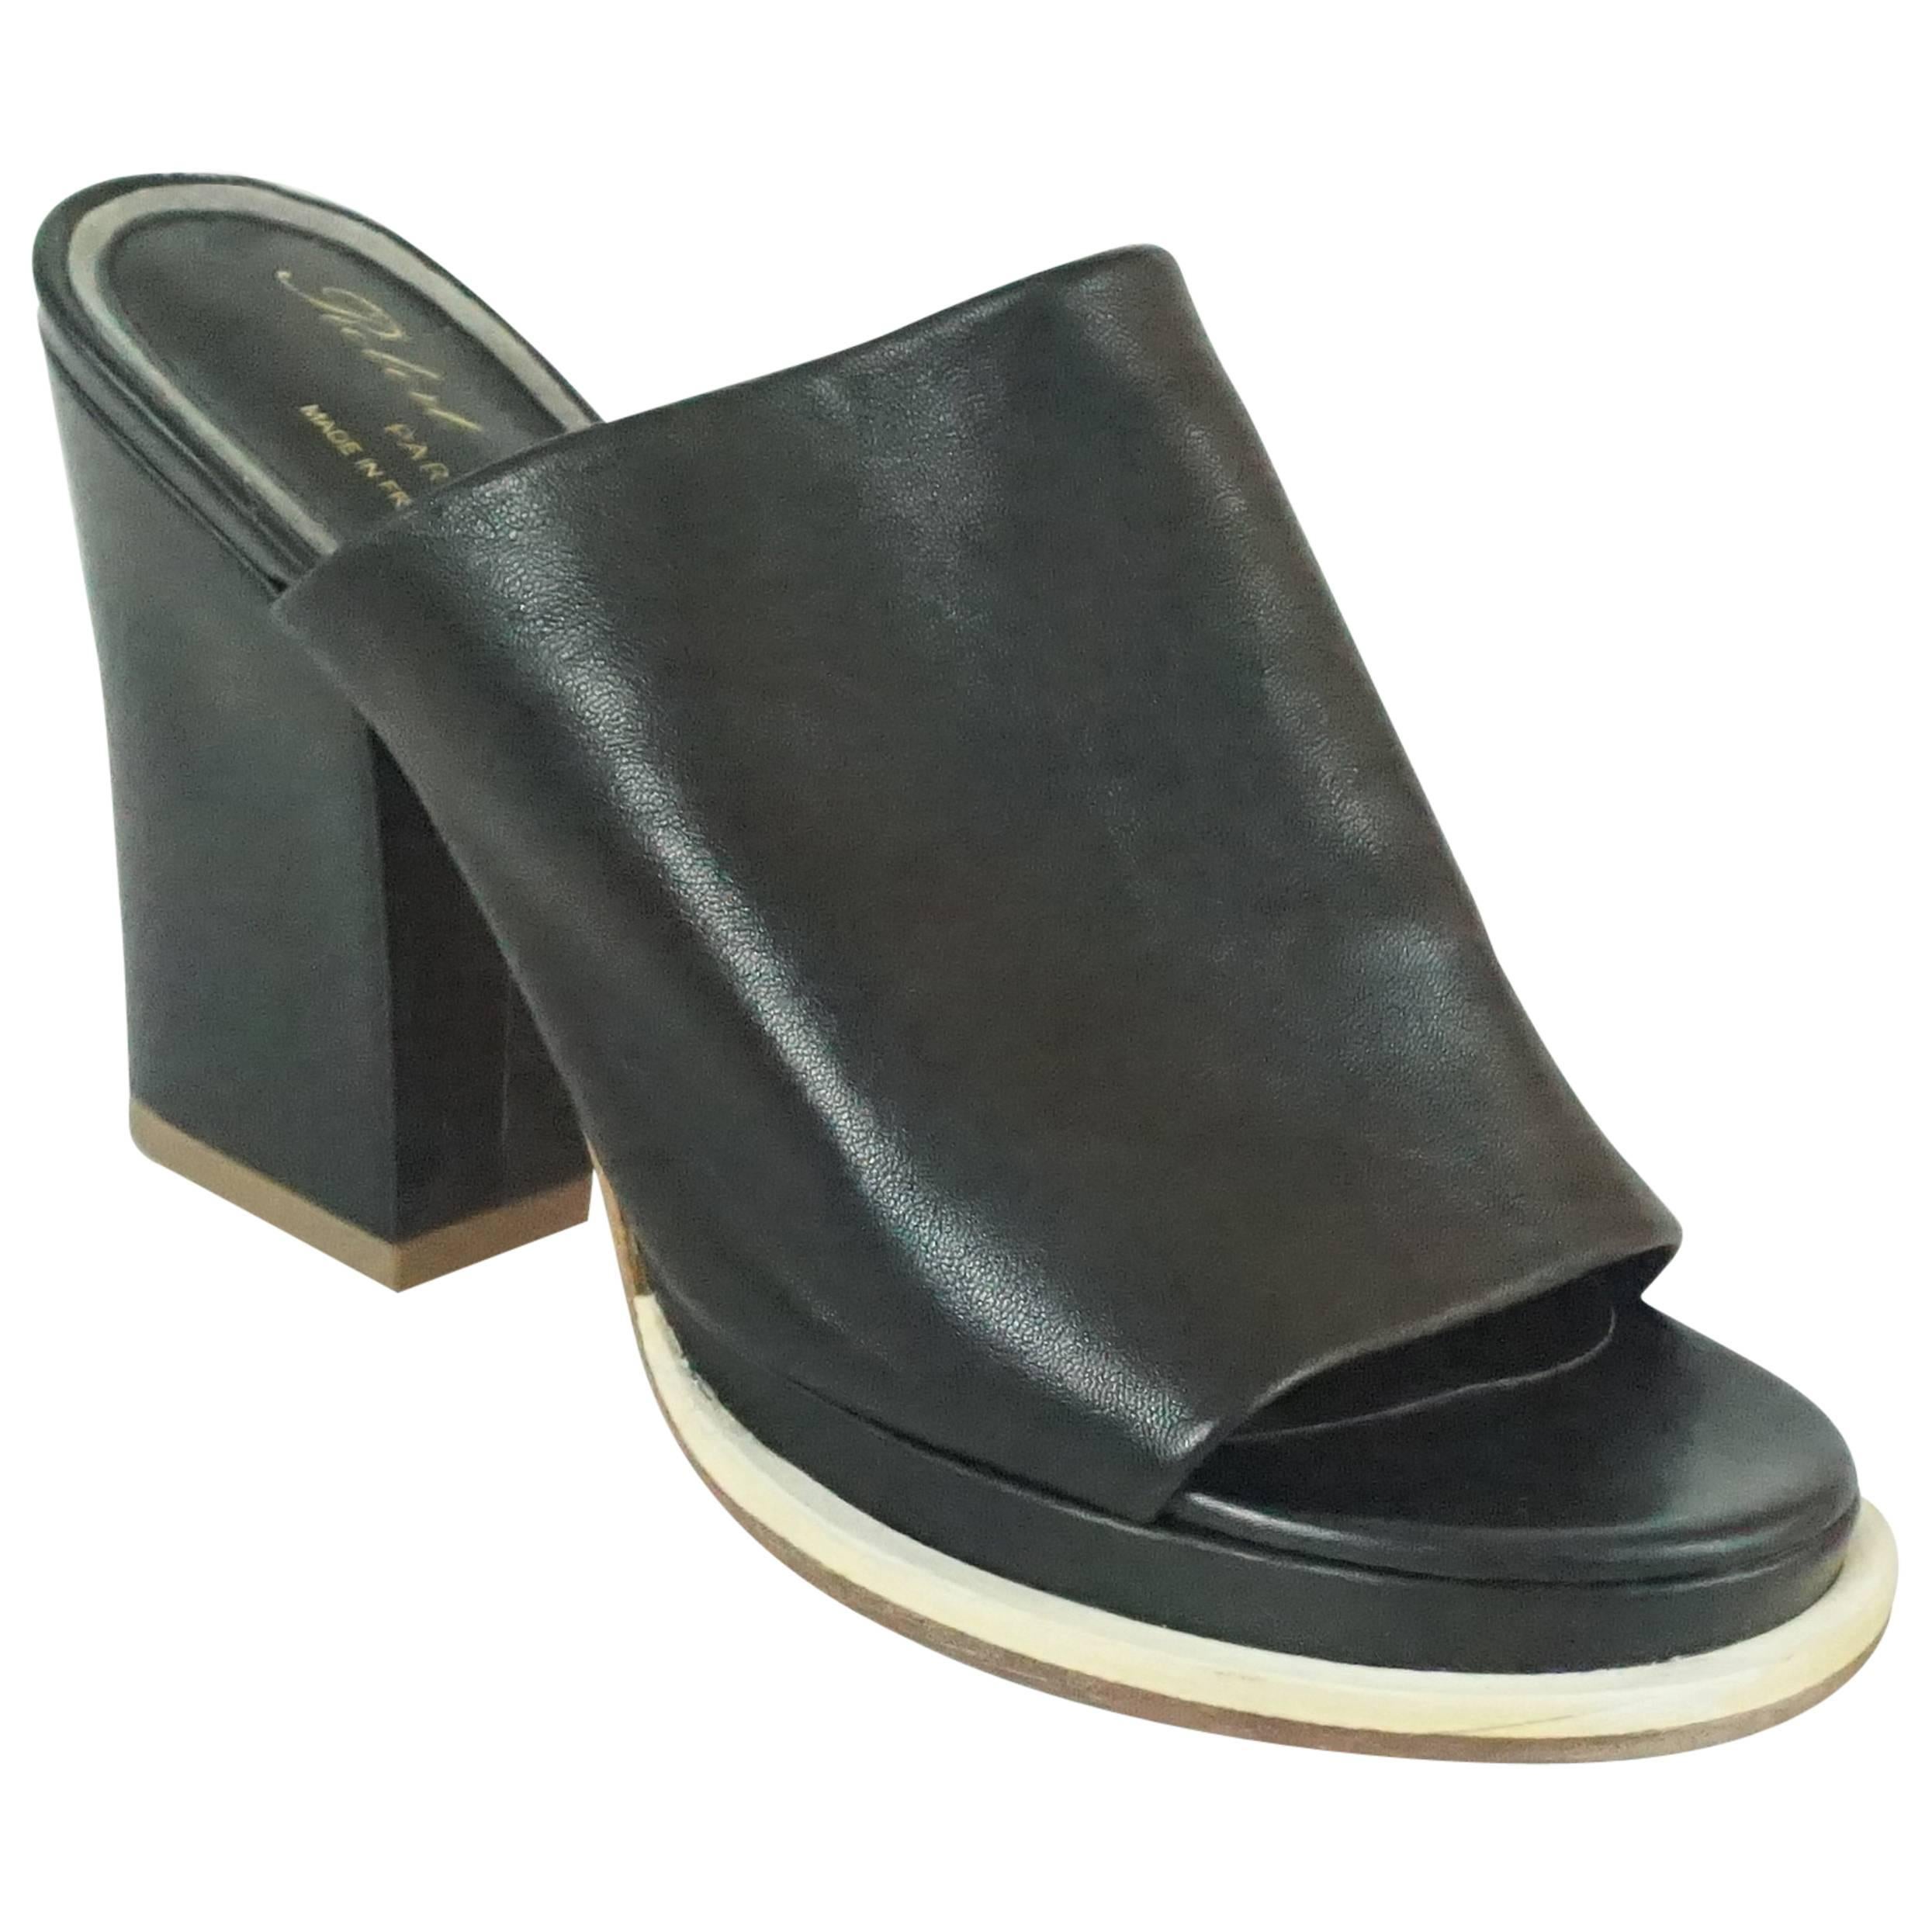 Robert Clergerie Black Leather Clogs with Block Heel - 37